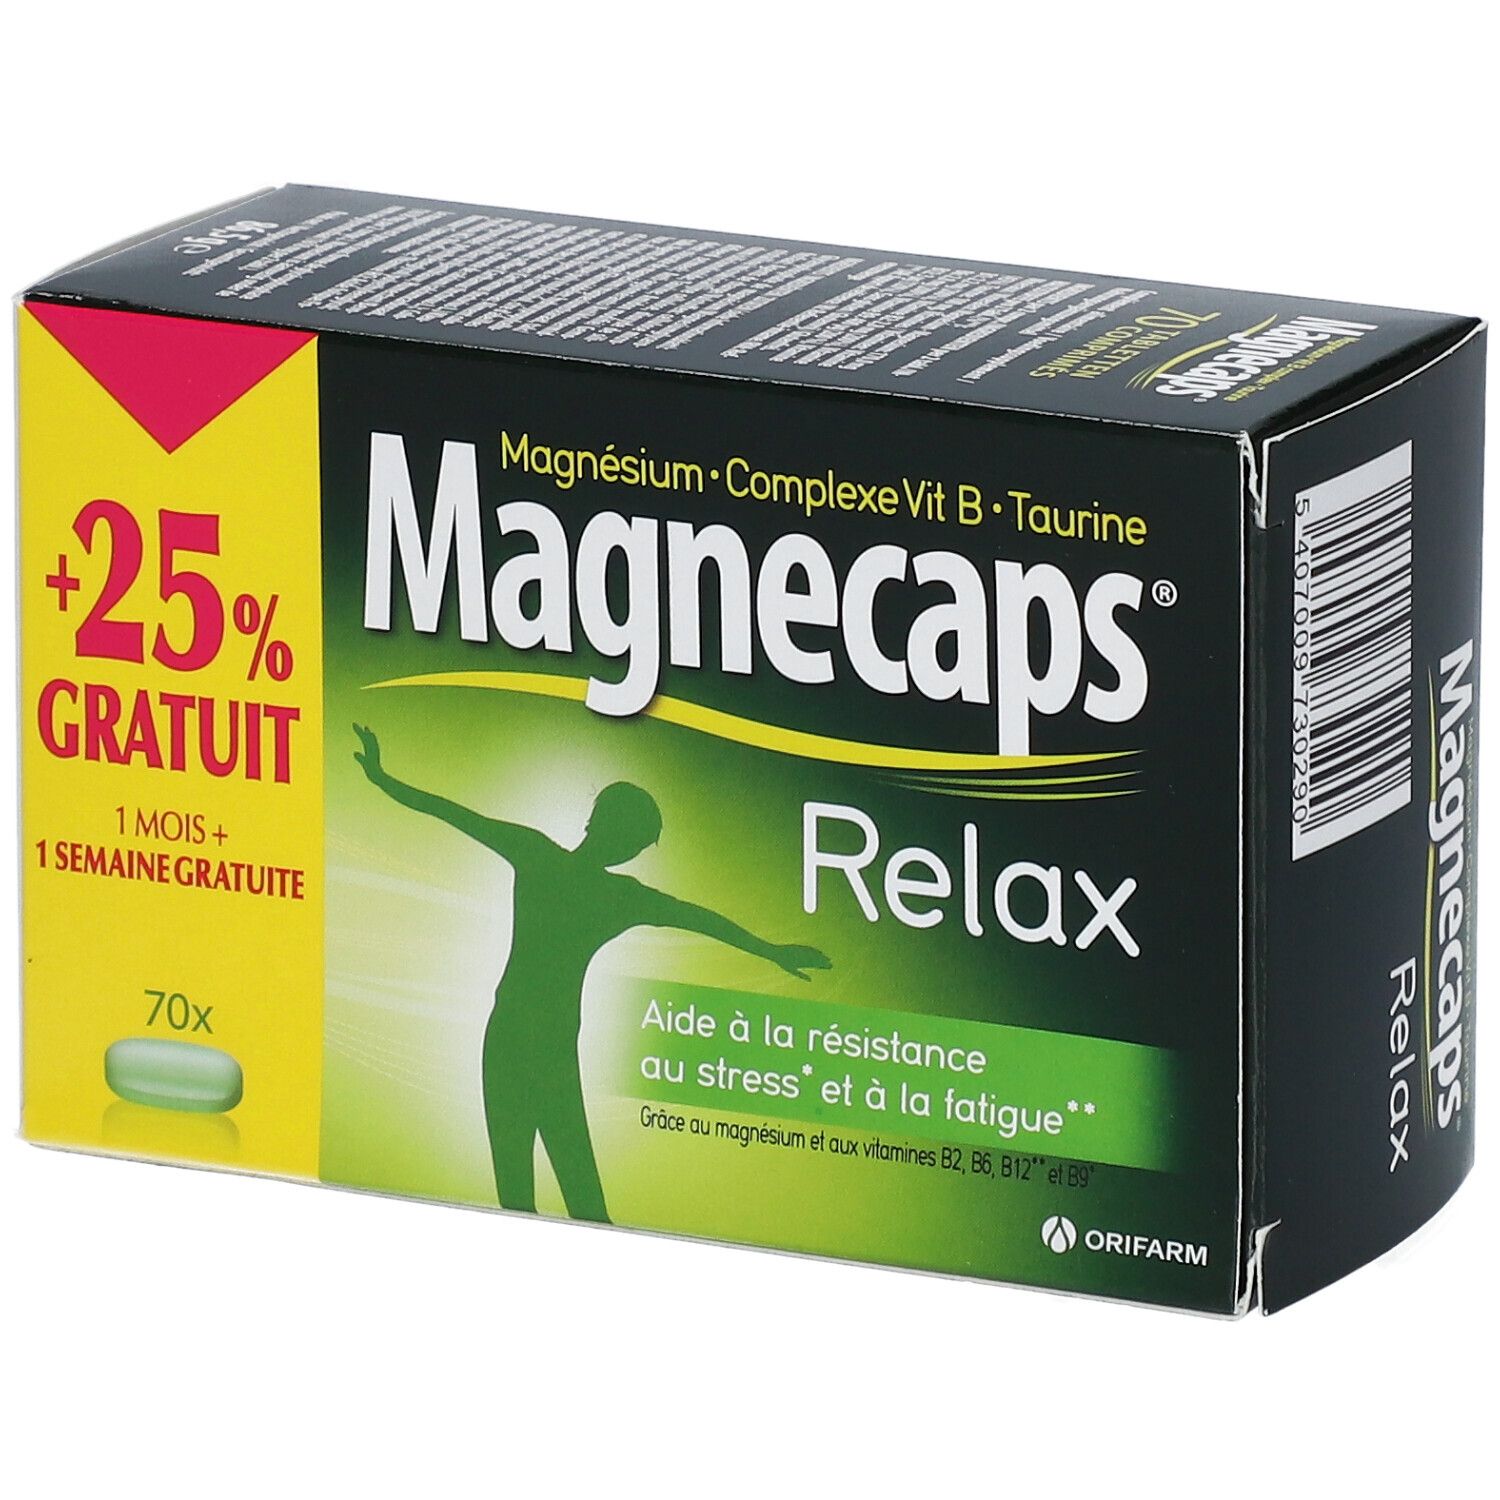 Image of Magnecaps Relax